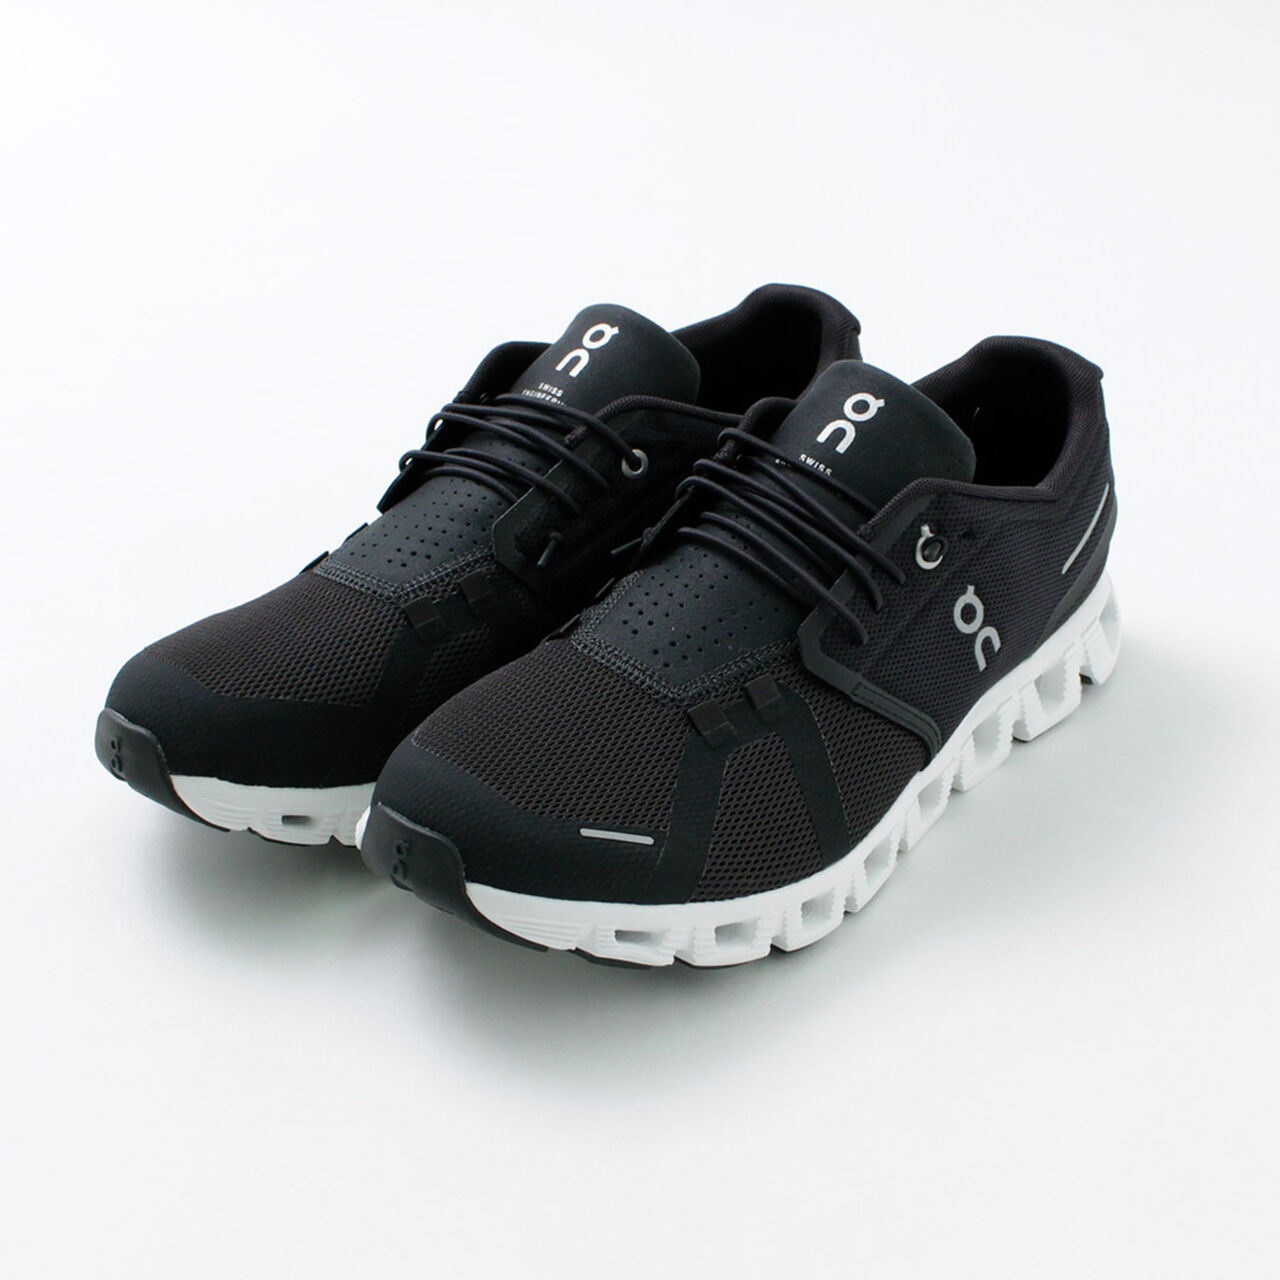 Cloud 5 Sneakers,Black_White, large image number 0